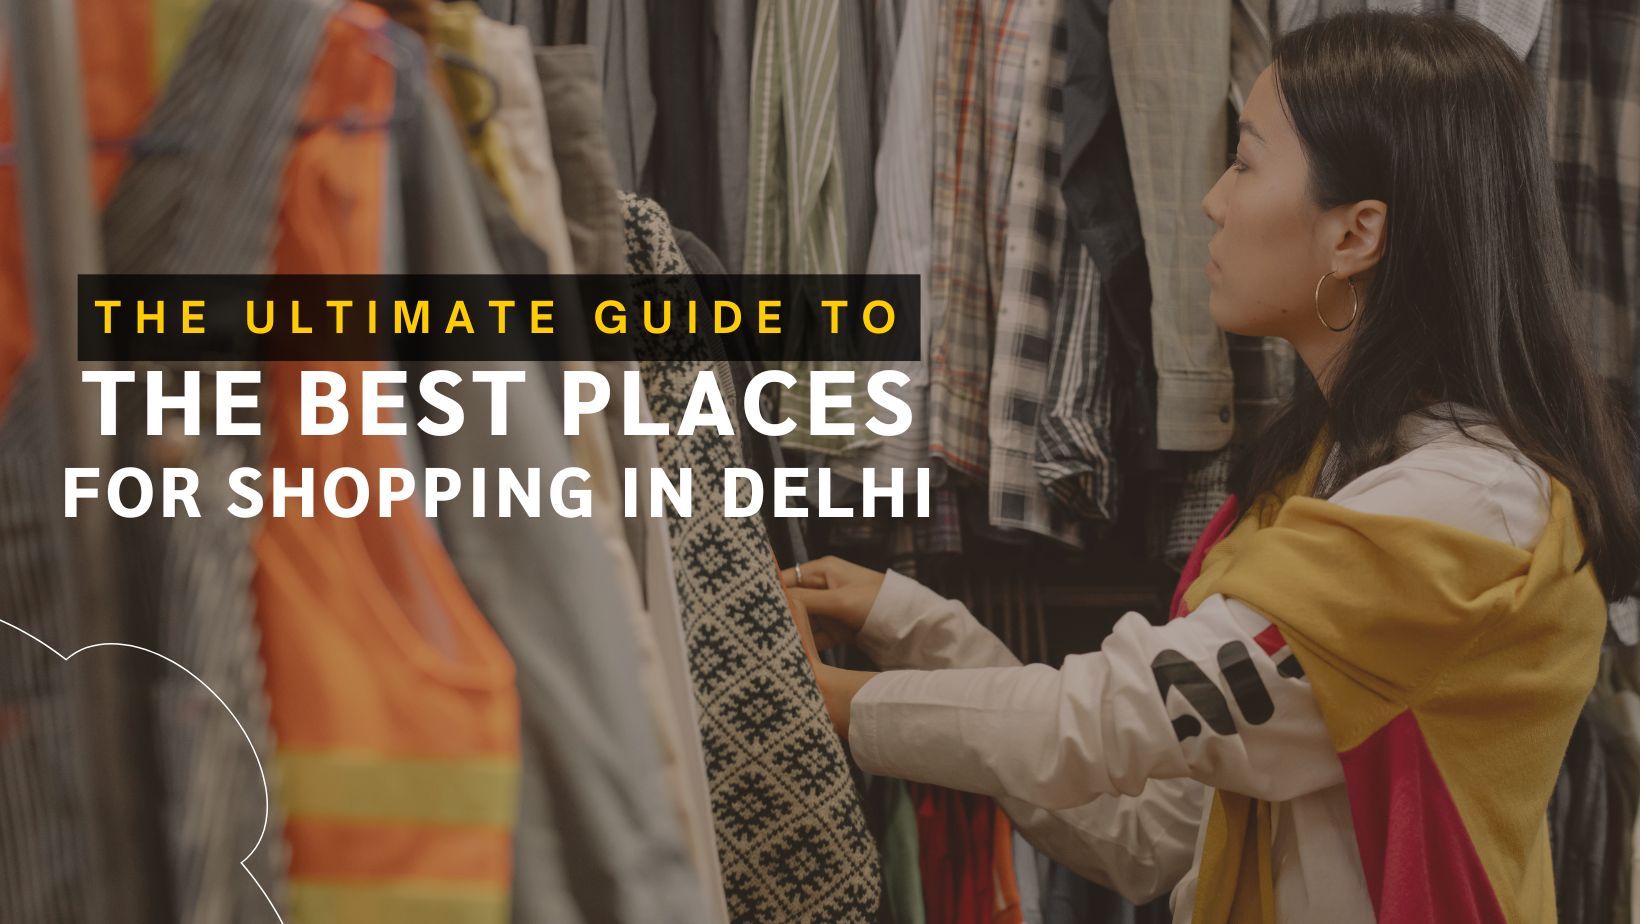 The Ultimate Guide to the Best Places for Shopping in Delhi